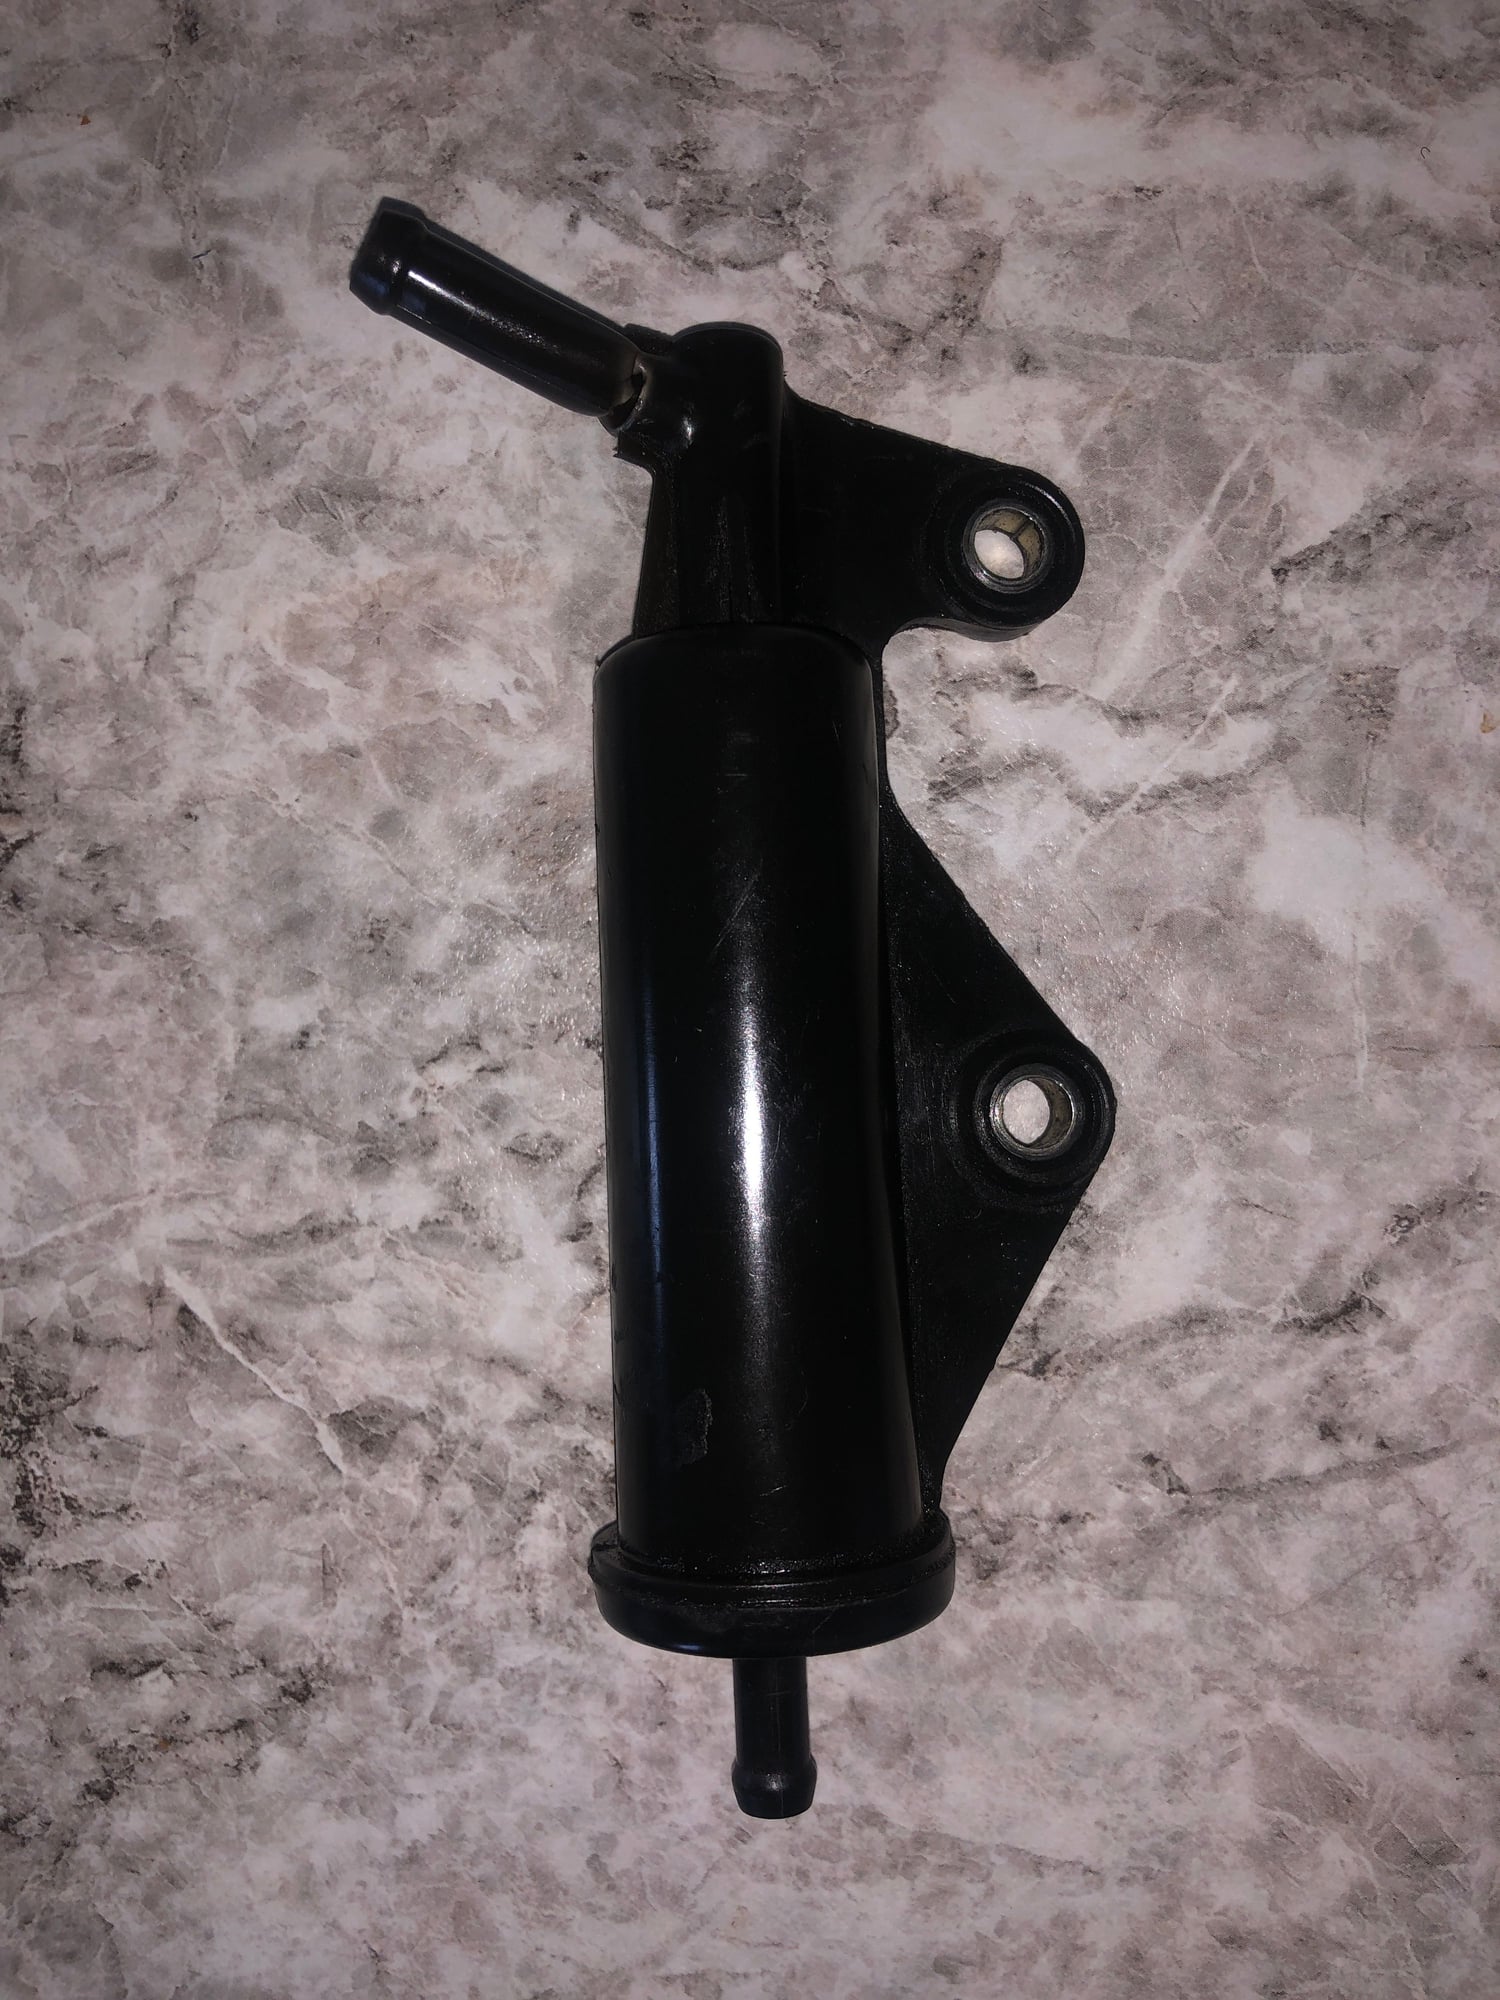 Miscellaneous - Vacuum Catch Tank - New or Used - 1992 to 2002 Mazda RX-7 - Winnipeg, MB R3T6A9, Canada